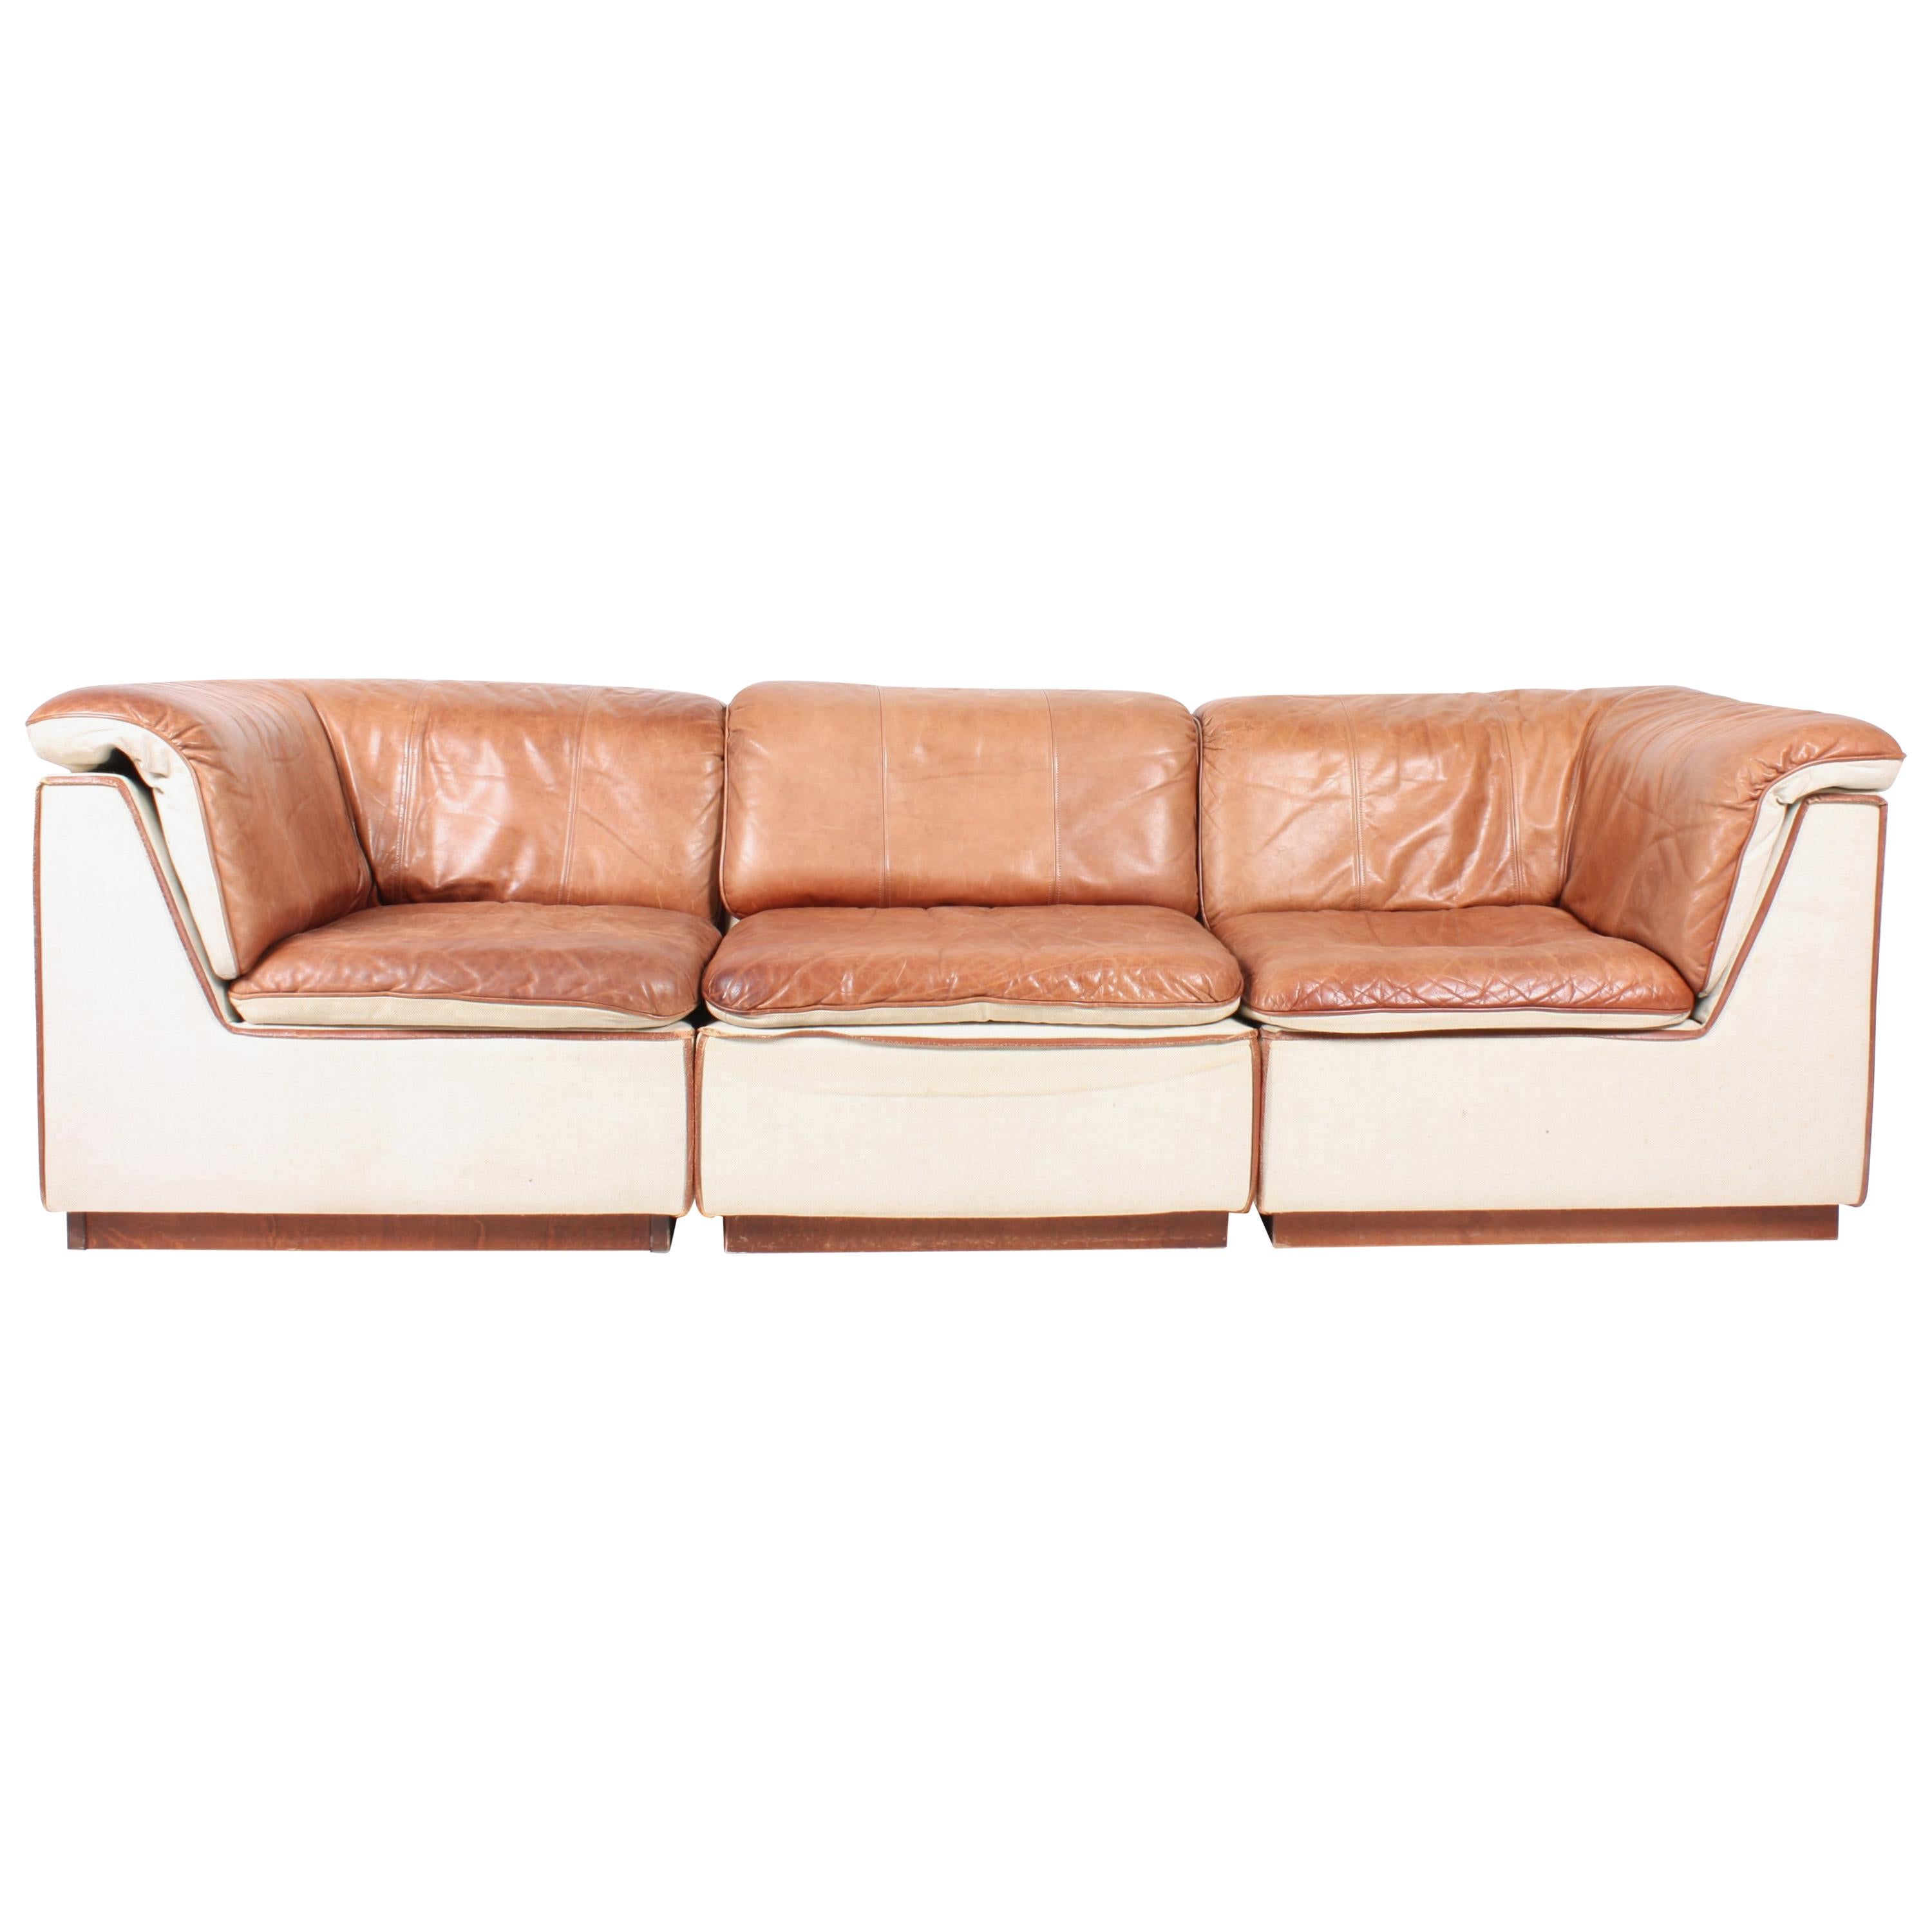 Modular Sofa in Patinated Leather